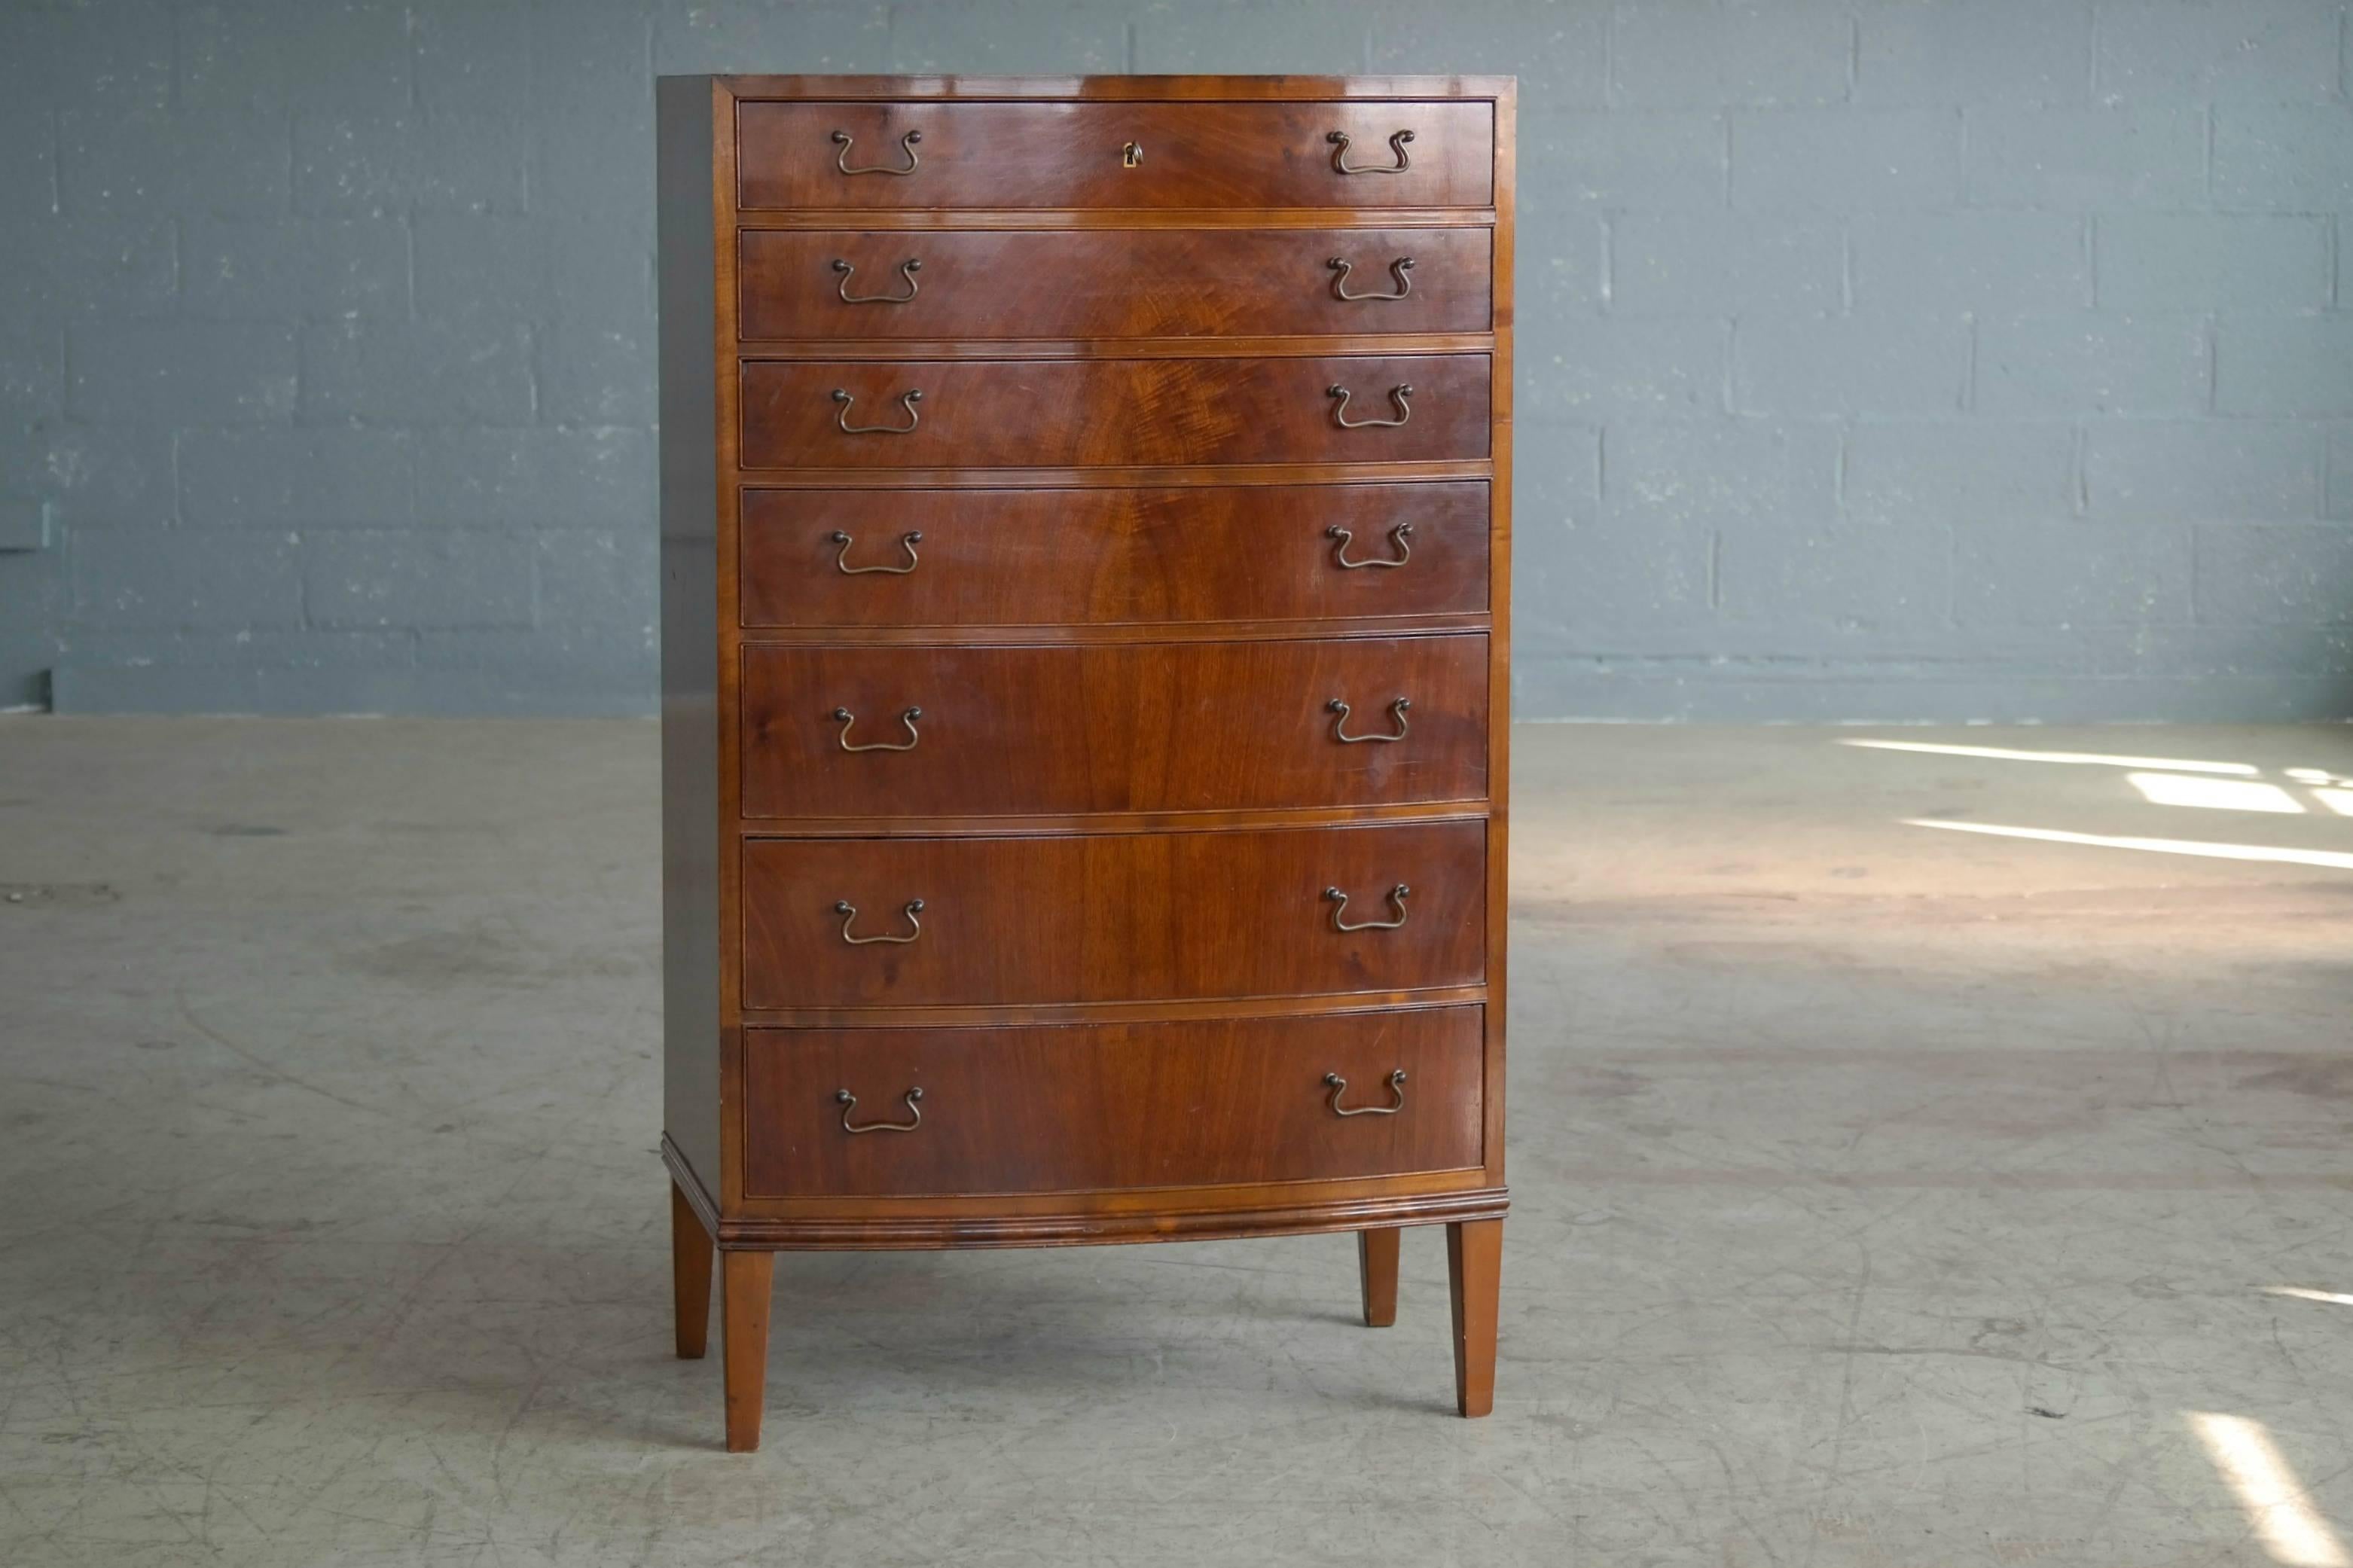 Incredibly elegant 1950s dresser or chest of drawers made by Master Carpenter, Georg Kofoed of Copenhagen, circa 1950. All solid and veneered Cuban mahogany with solid ply dovetailing and antiqued brass pulls. Highest quality craftsmanship. Superb.